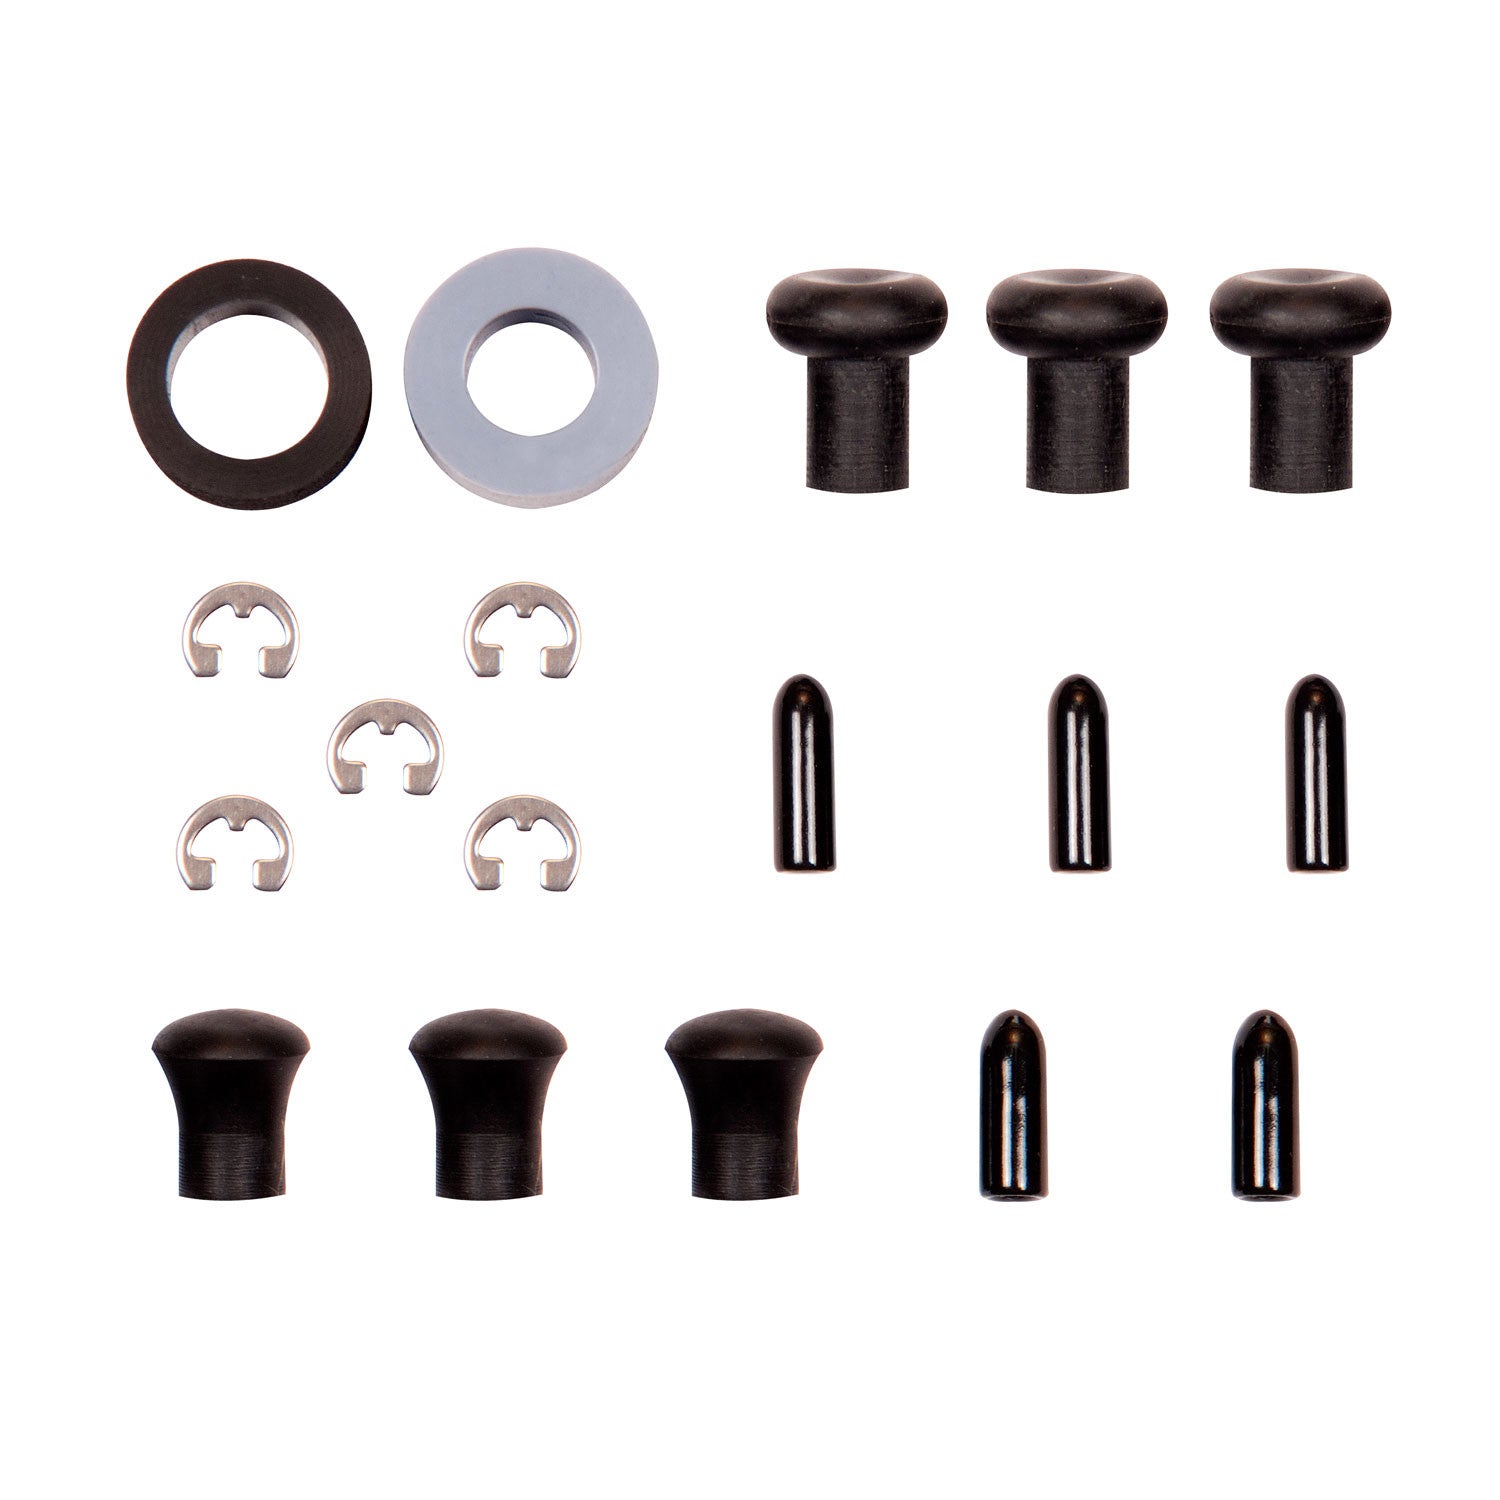 Control and Push Button Tip Assortment for DSLR Housings